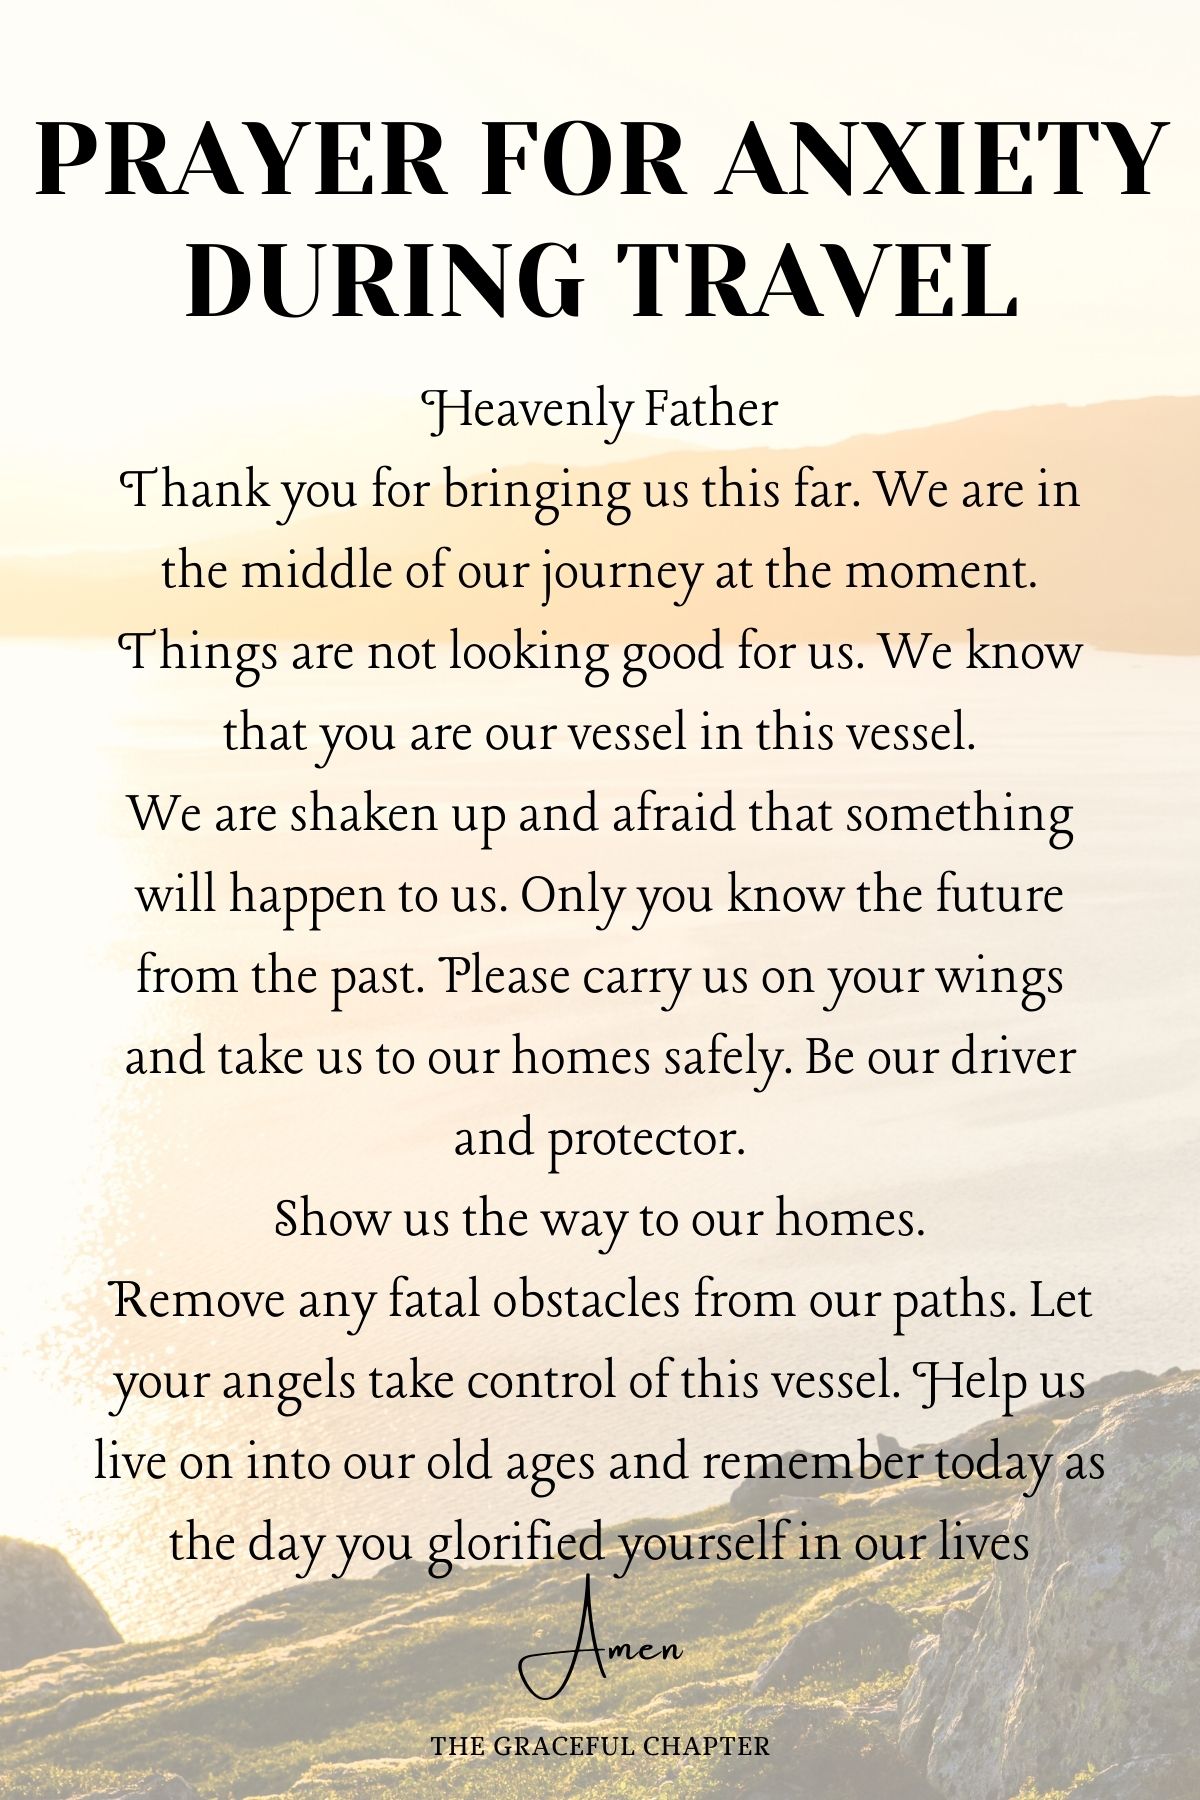 Prayer for Anxiety during Travel